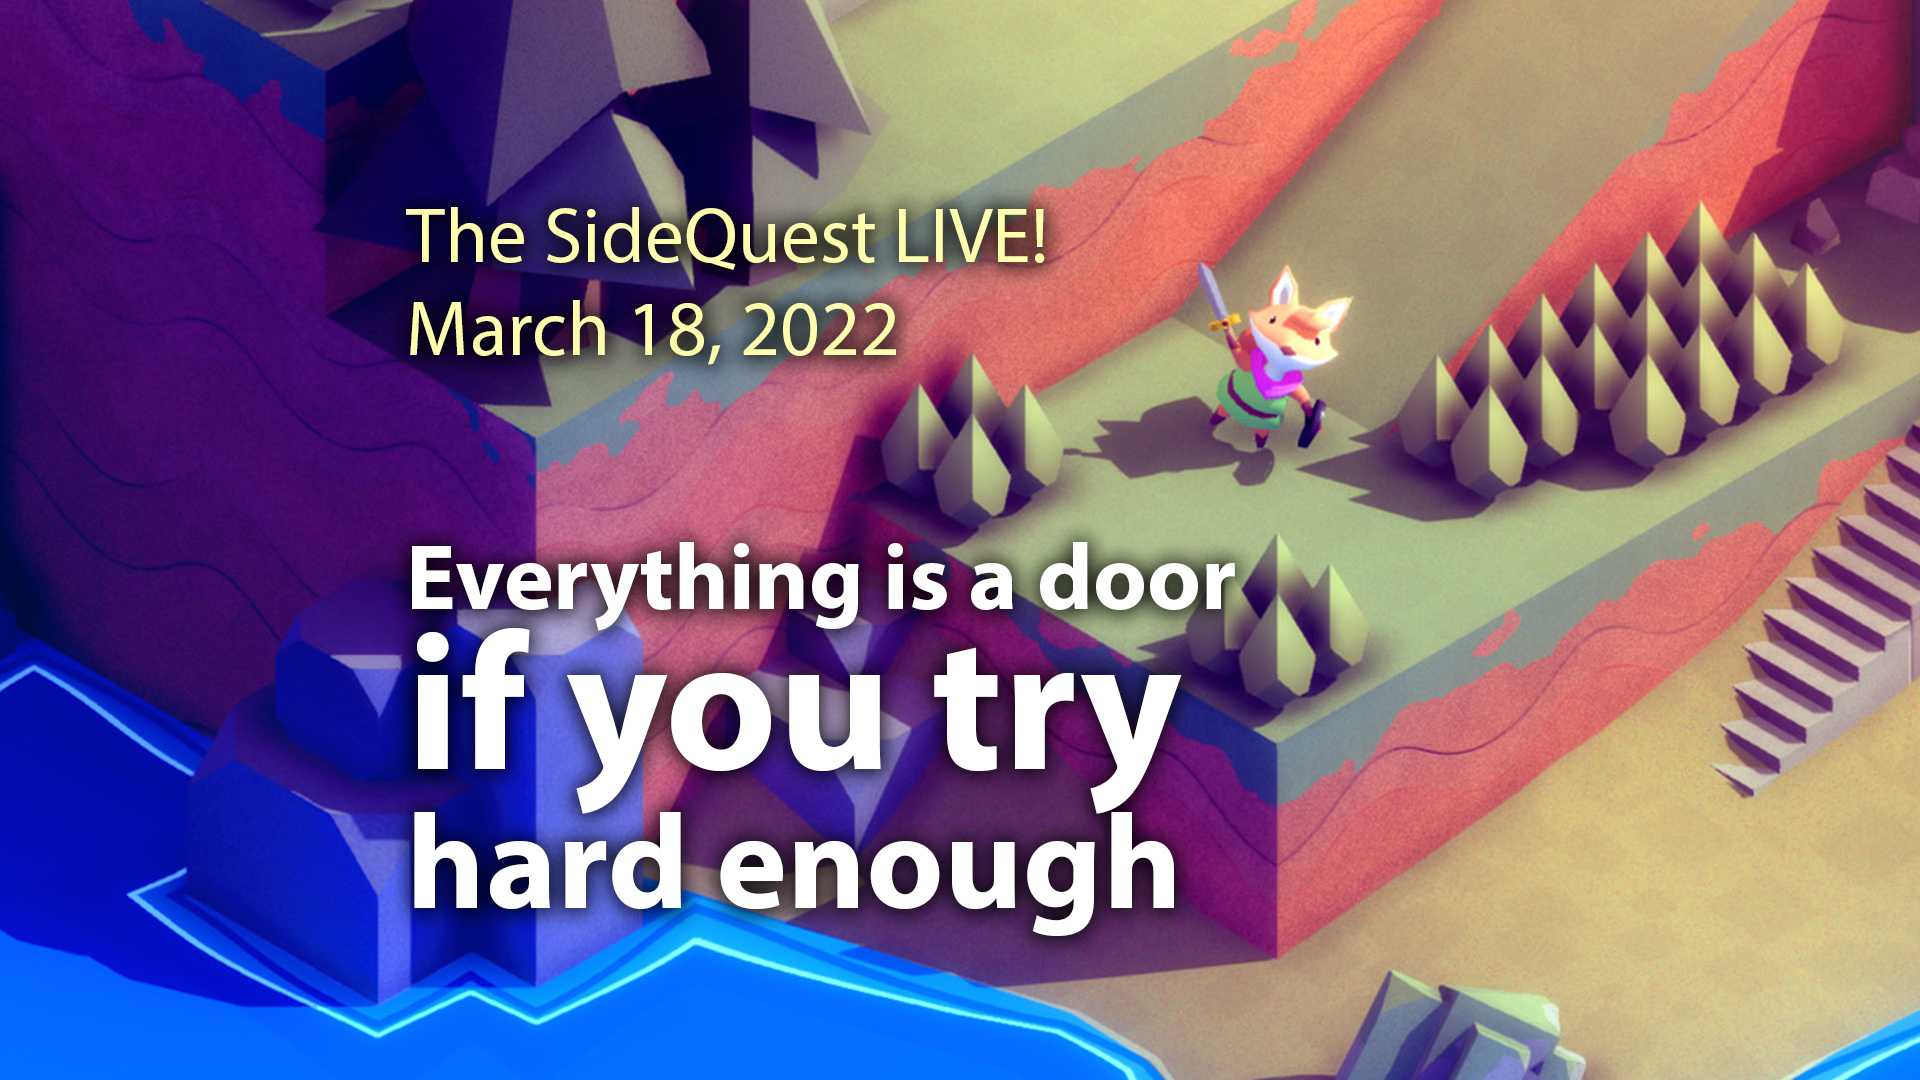 The SideQuest LIVE! March 18, 2022: Everything is a door if you try hard enough